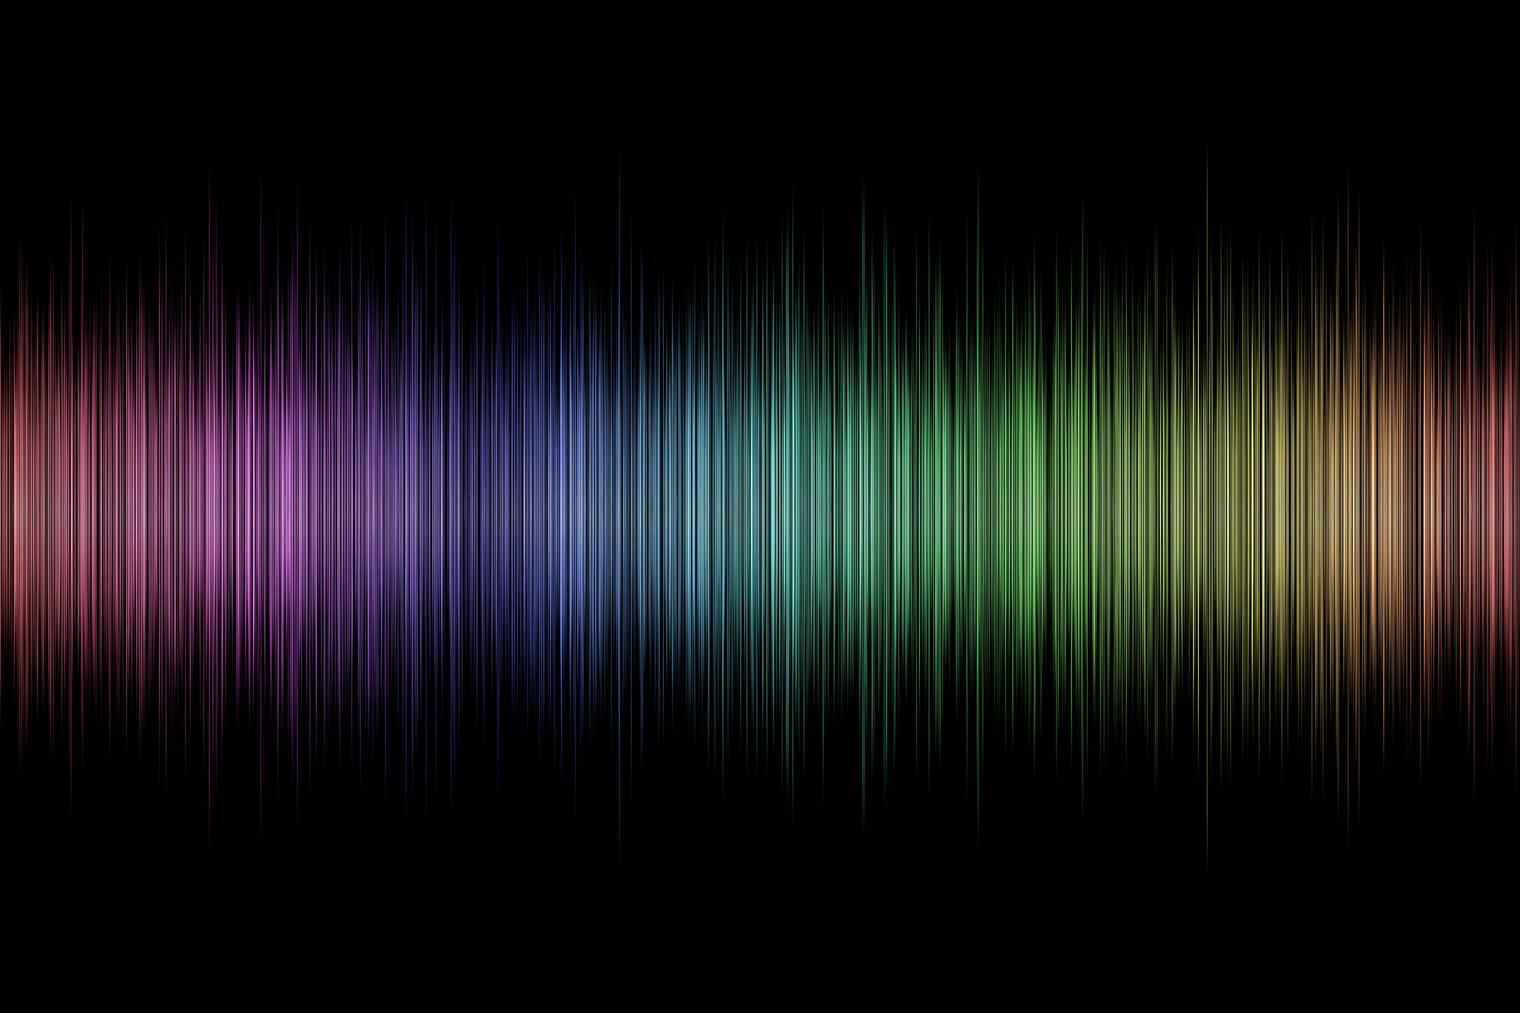 AN ECG OF SOUND WITH RAINBOW COLORS